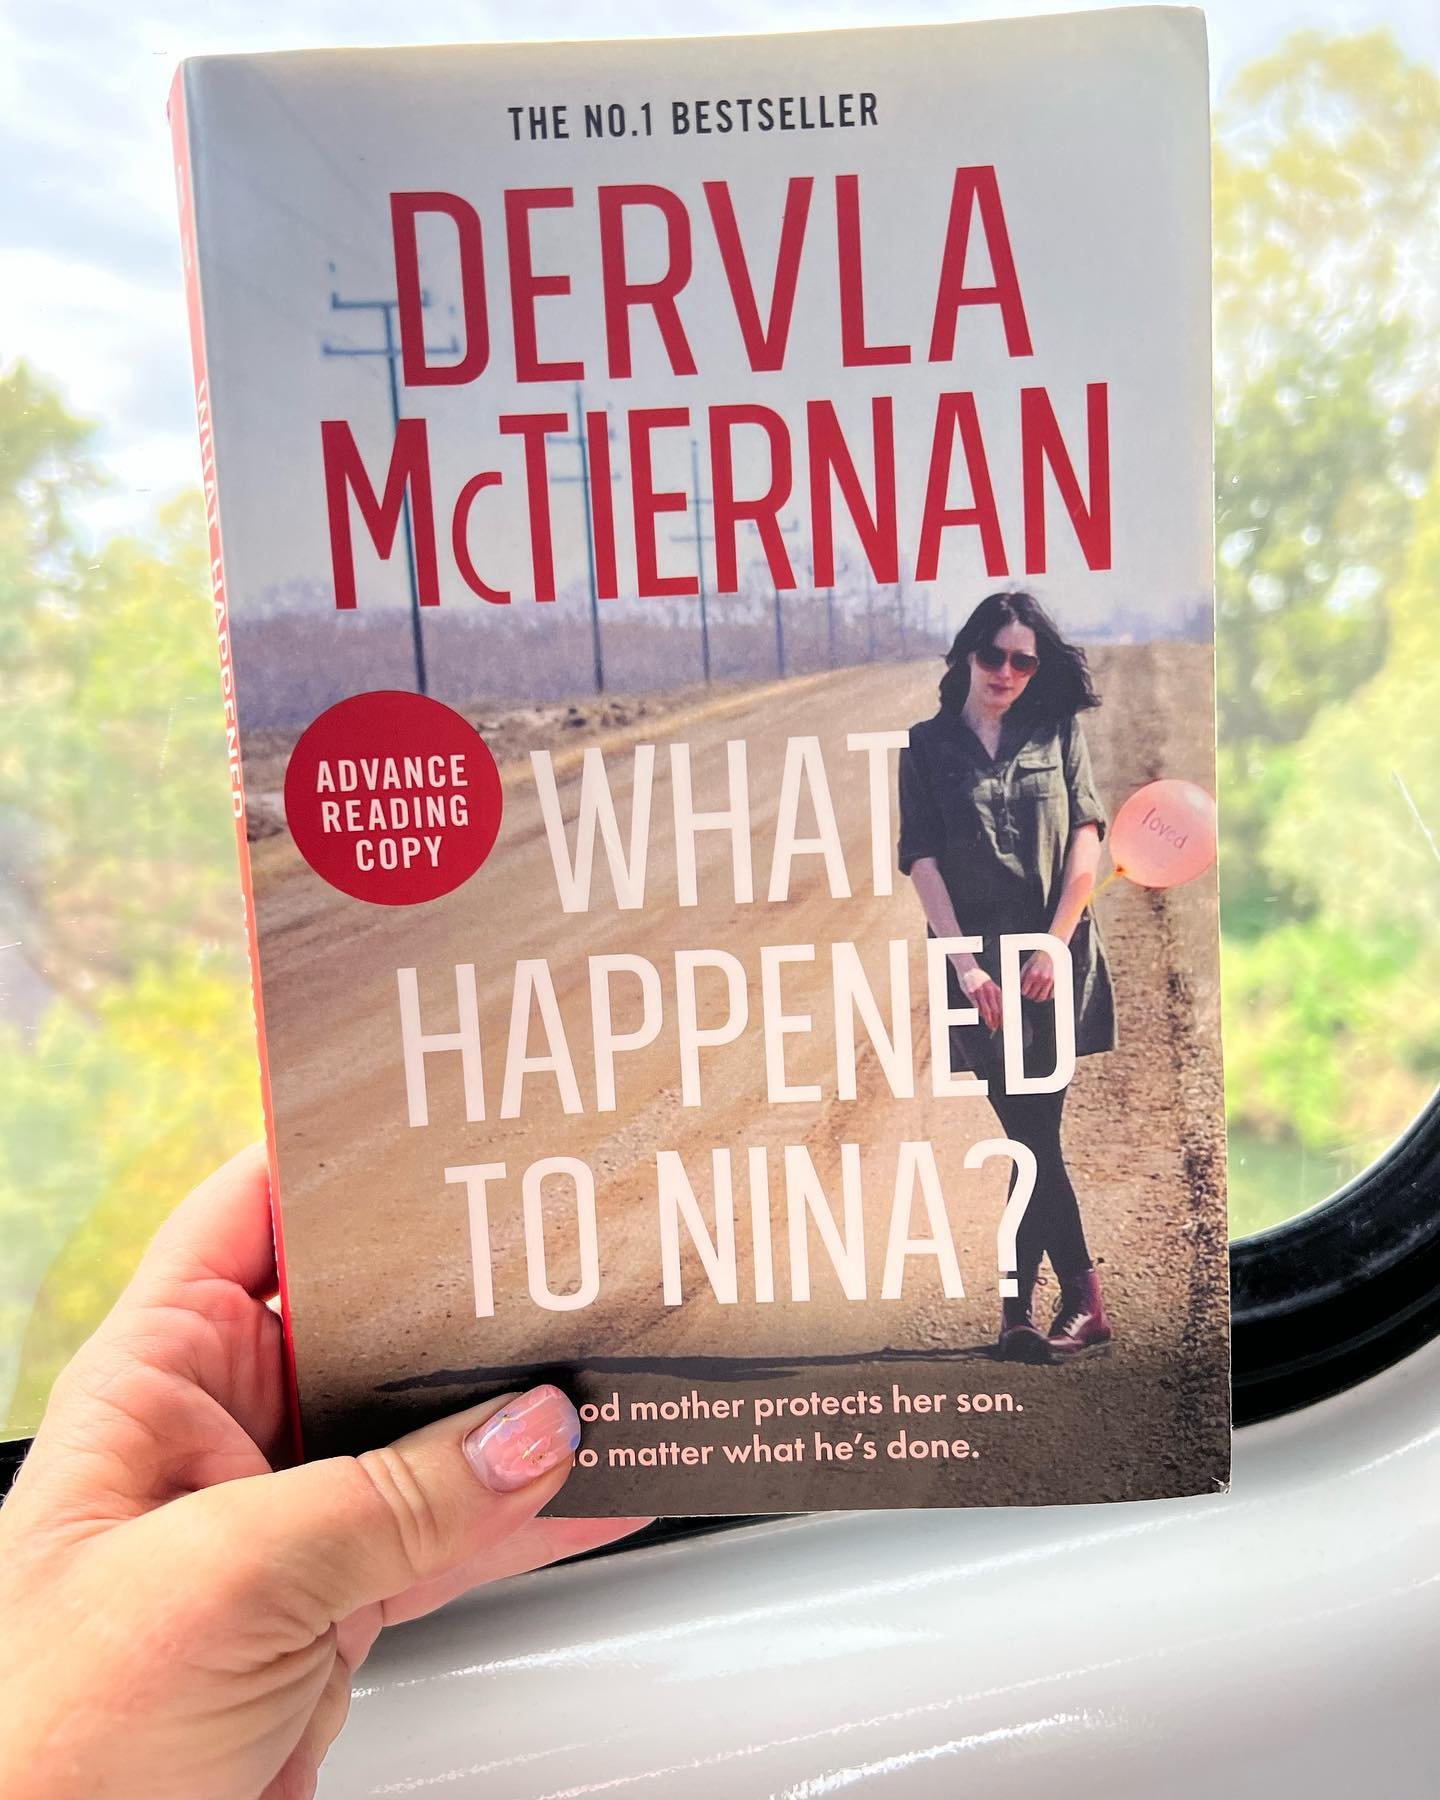 All set for the Tamworth to Sydney rail trip. 📖🚊

A quarter way in and totally hooked! Can&rsquo;t wait to find out what happened to Nina!
.
.
.
.
.
#whathappenedtonina #dervlamctiernan #crimethriller #crimefiction #crimenovel #trainreading @dervla